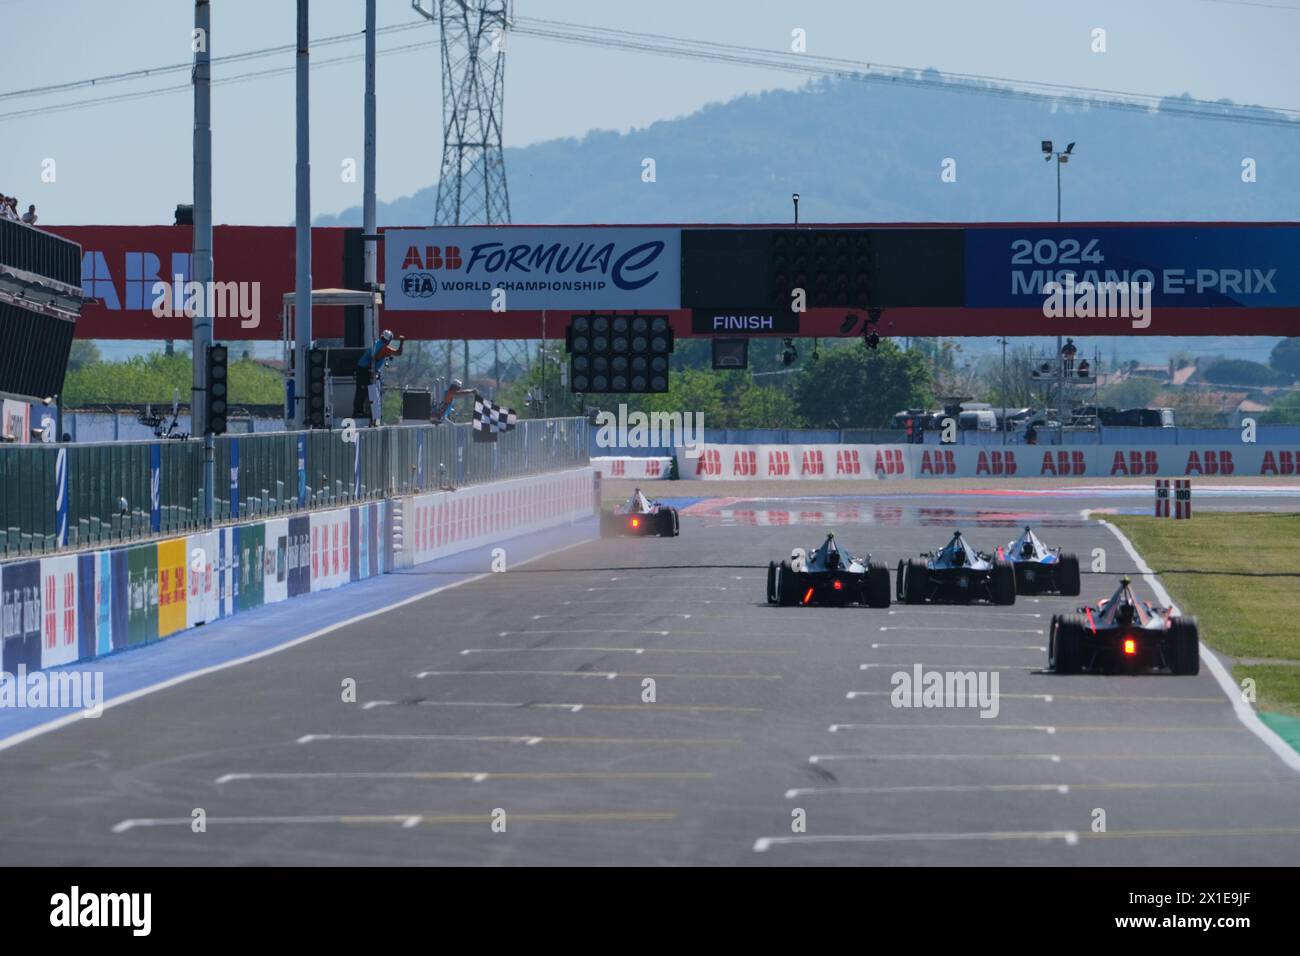 Pascal Wehrlein of TAG Heuer Porsche Formula E Team wins the race at the Round 7 of ABB Formula E World Championship 2024 Misano E-Prix. Pascal Wehrlein of Tag Heuer Porsche Formula E Team takes first place, and in second place, Dennis of Andretti Formula E. Third place for Nick Cassidy of Jaguar TCS Racing. Stock Photo